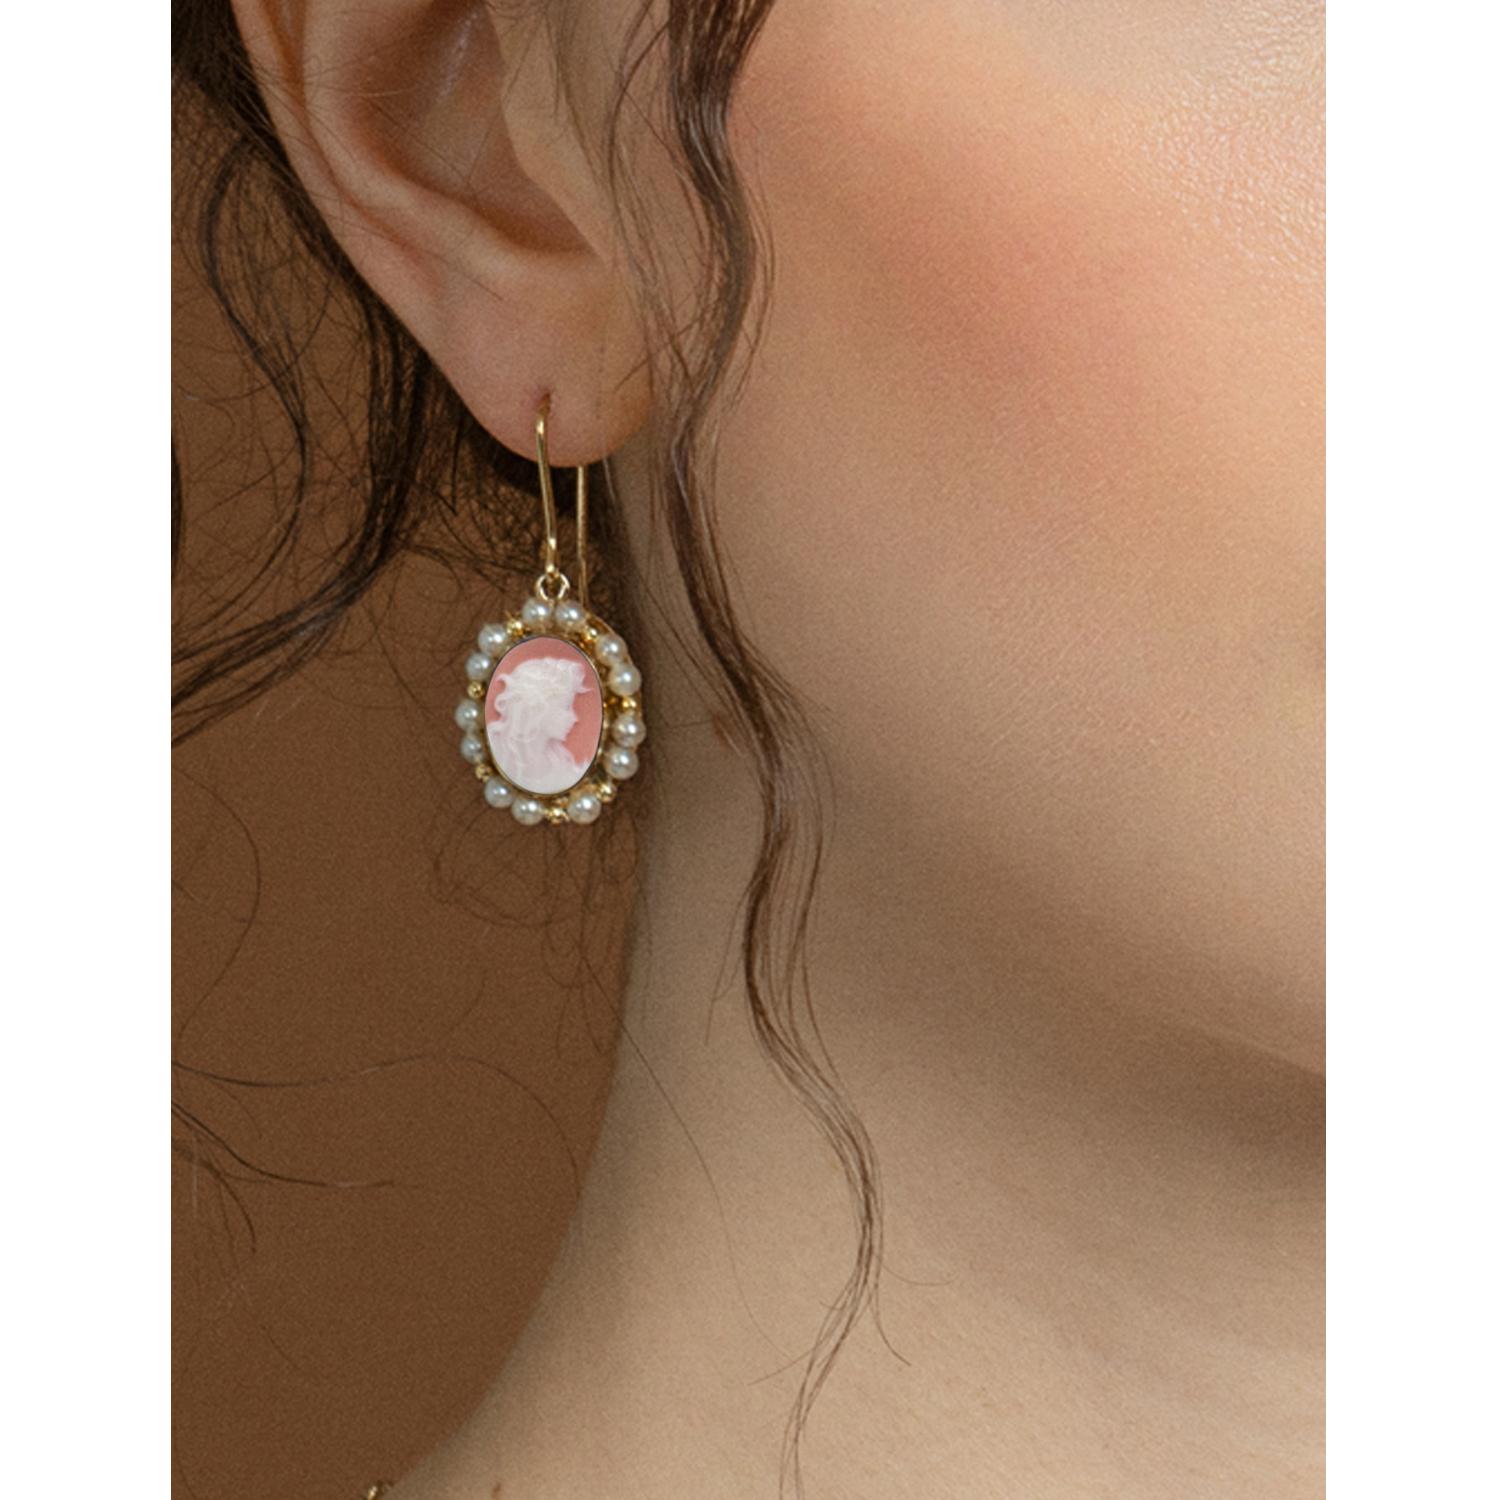 Crafted in 14-karat gold by the skilled hands of experienced Italian artisans, these elegant earrings from Vintouch's Little Lovelies collection feature a pair of hand-engraved cameos on Capodimonte porcelain, depicting two young women, a symbol of